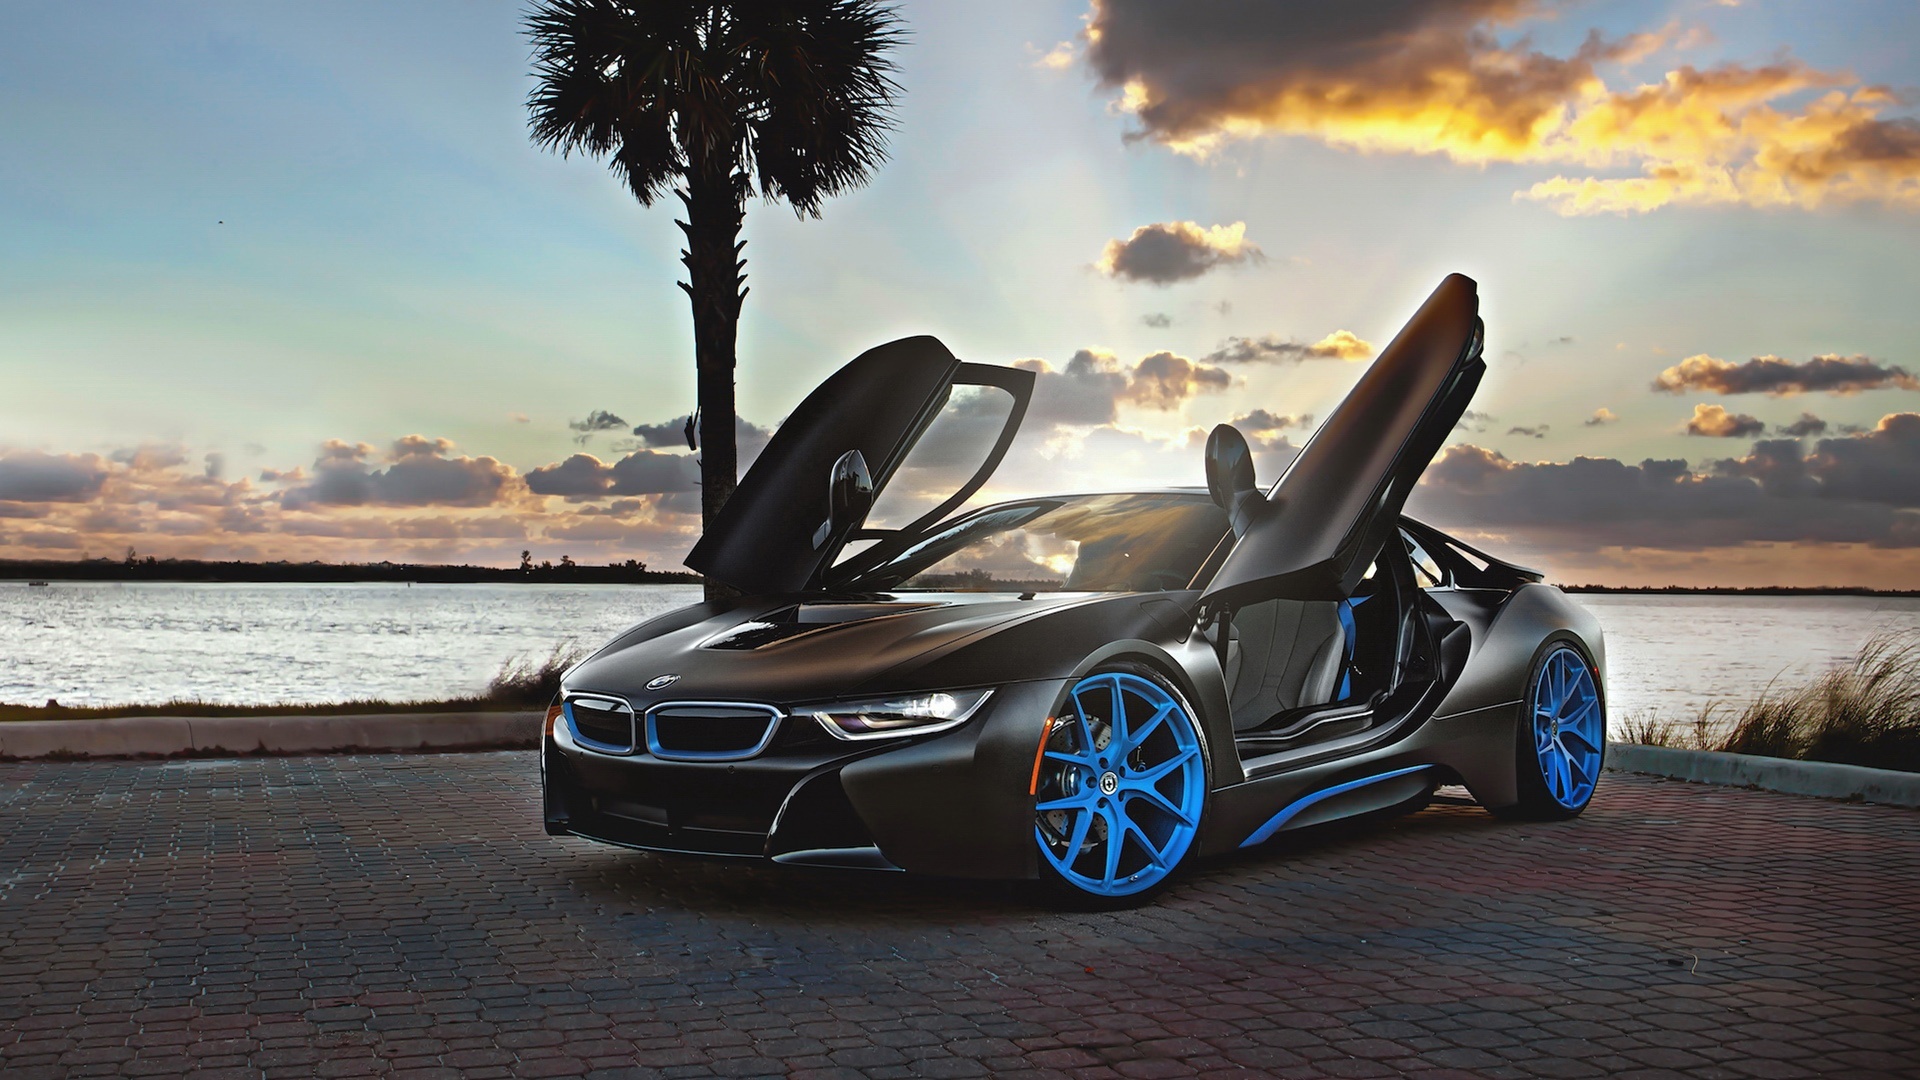 BMW i8 Supercar, High-definition wallpapers, Head-turning style, Unmatched power, Supercar beauty, 1920x1080 Full HD Desktop